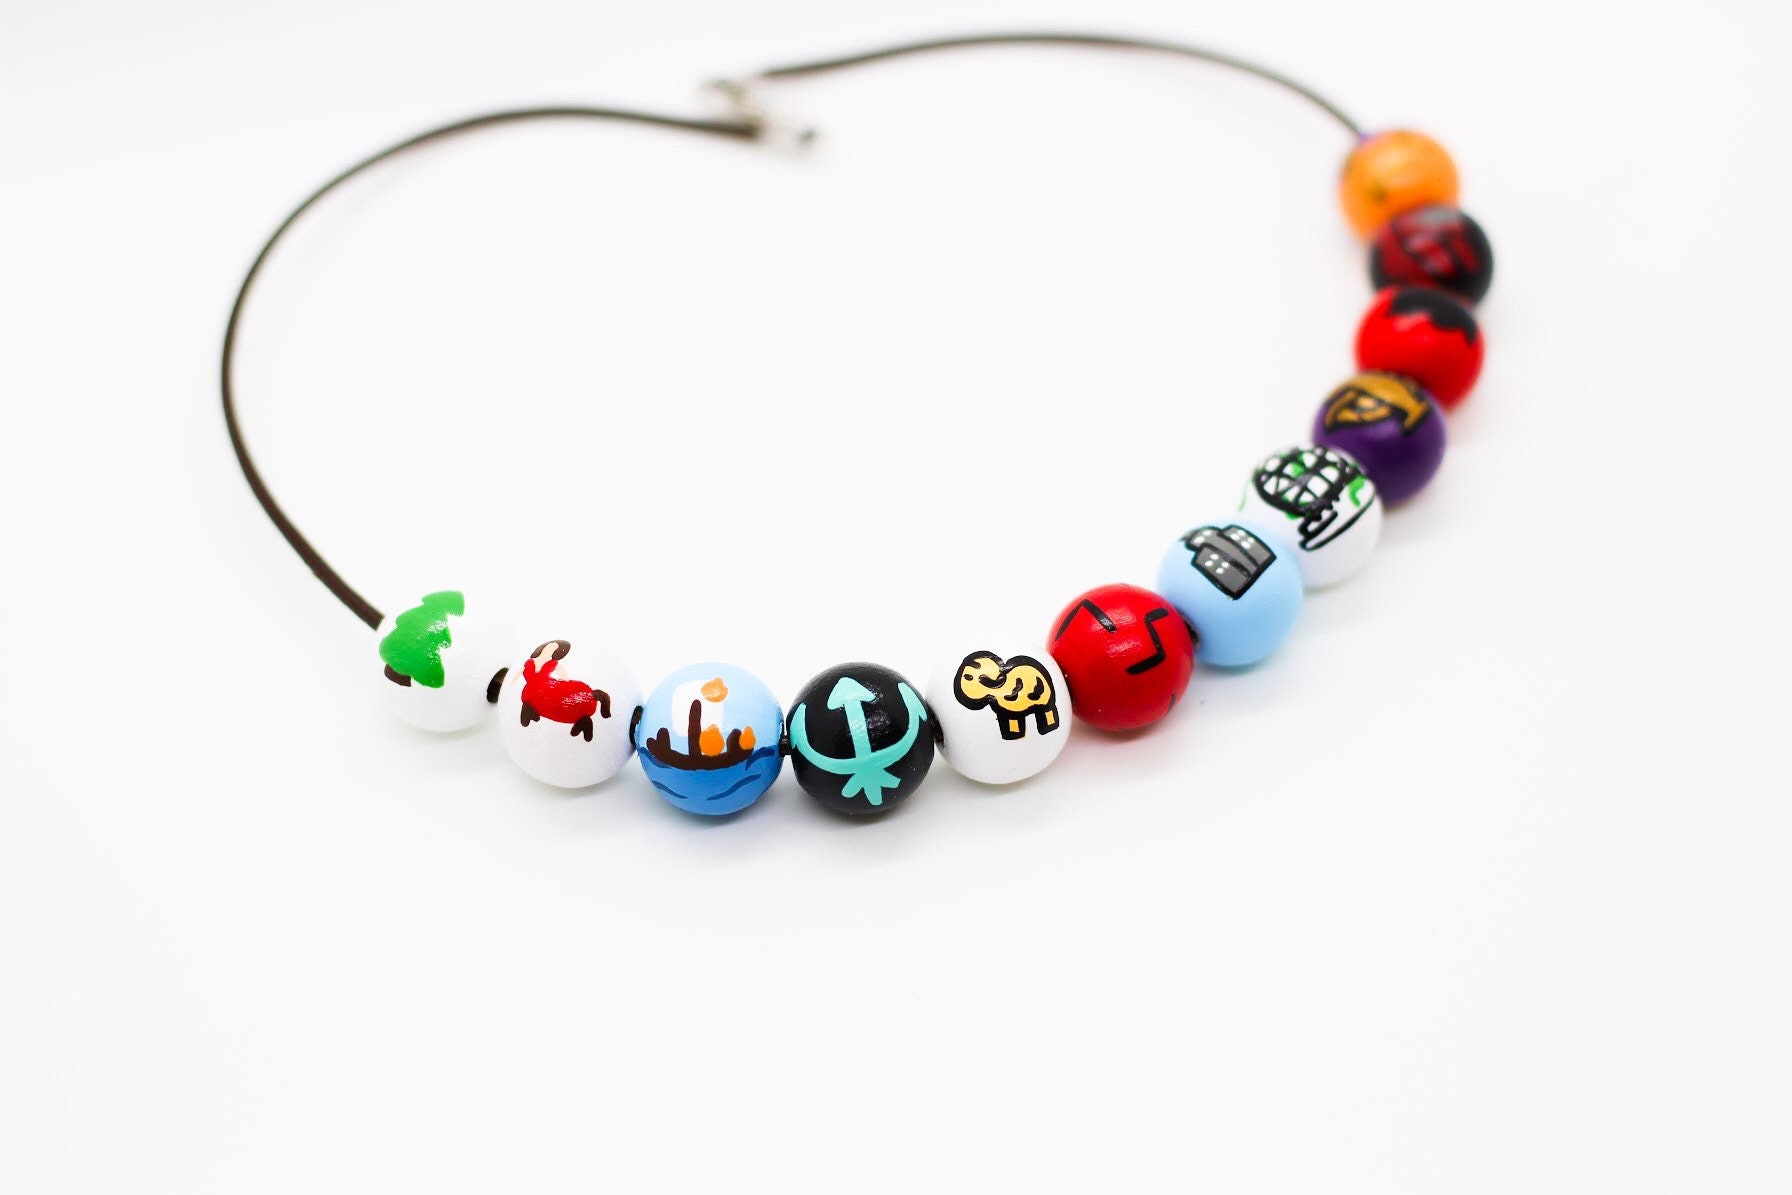 Rainbow Pride Necklace with Czech Glass Beads on Black Rubber Cord, 18